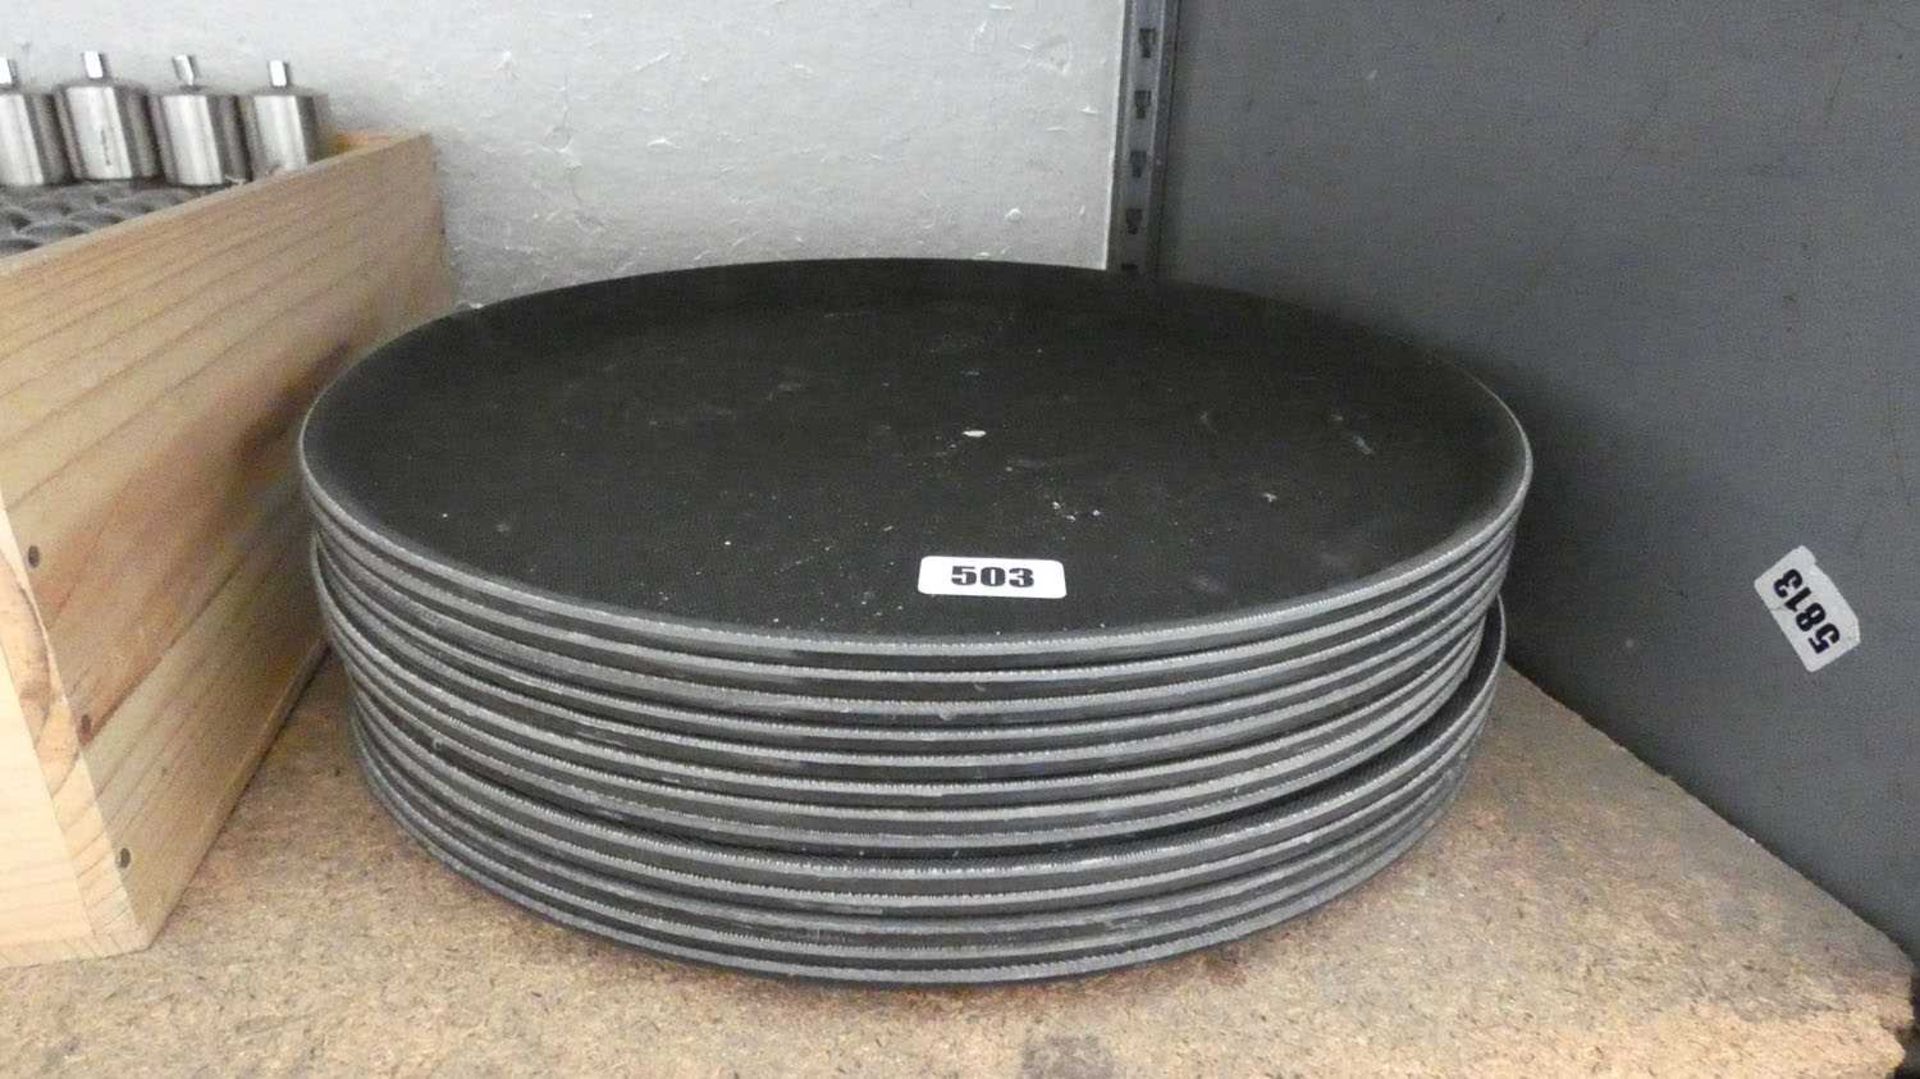 Approx 12 x 16inch round rubber non-slip serving trays